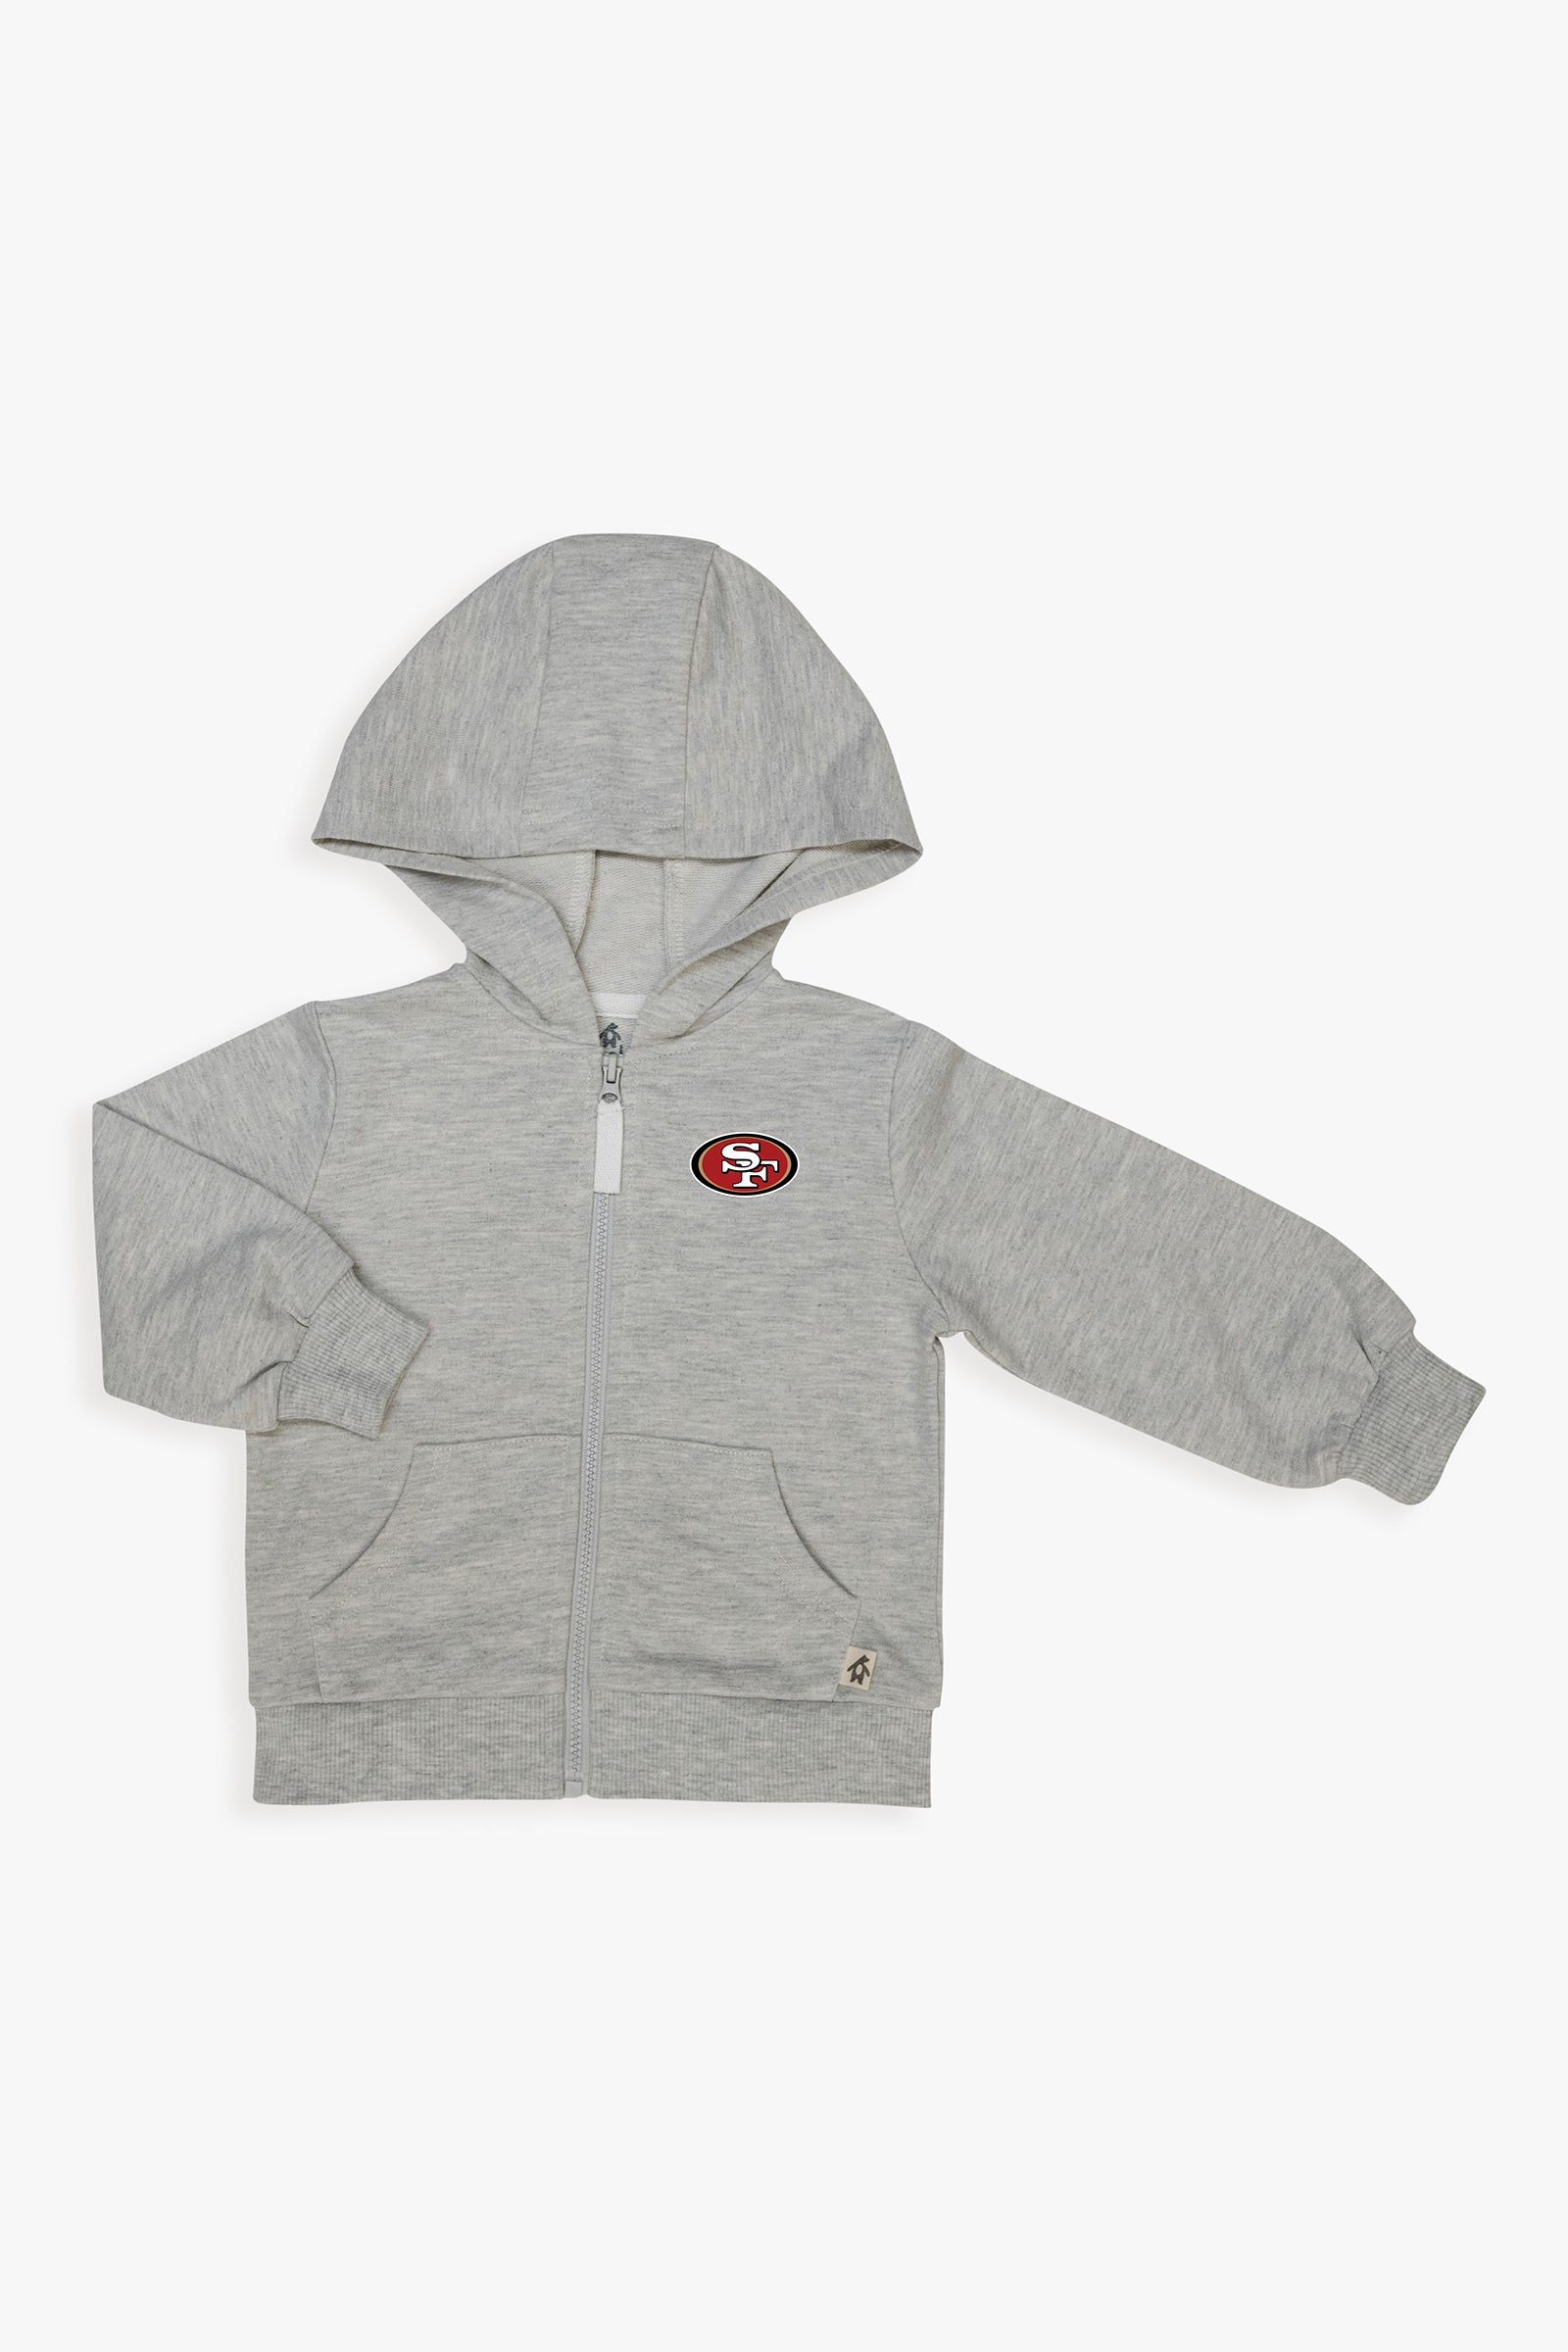 NFL Football Team Logo Grey Unisex Toddler Hoodie Zip-Up French Terry Baby